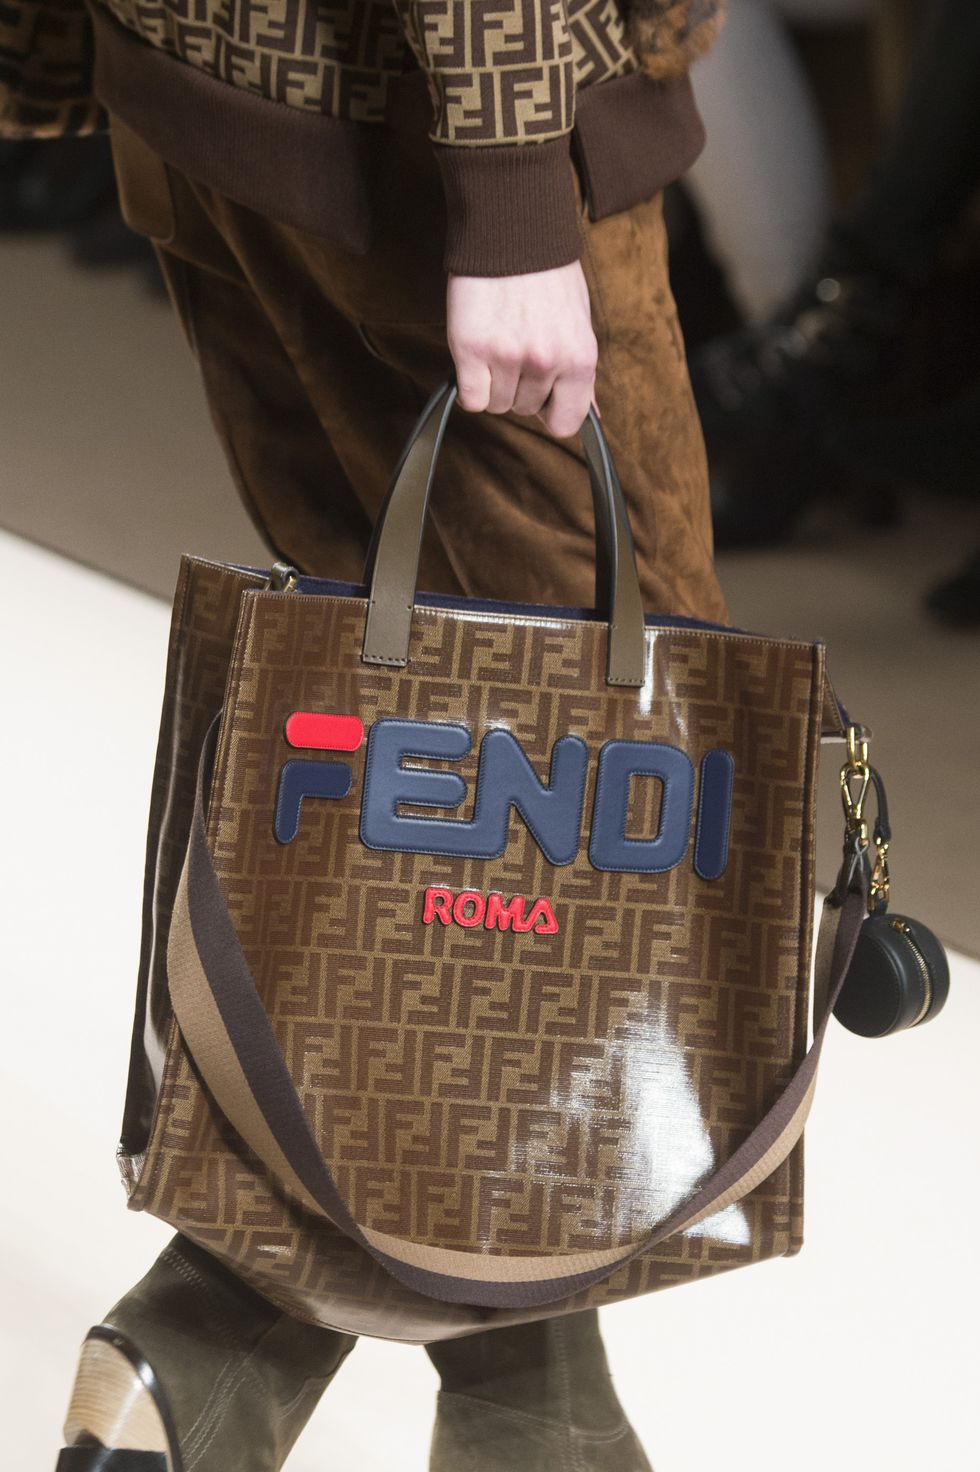 Fendi on X: As impactful as they are lightweight, the #Fendi